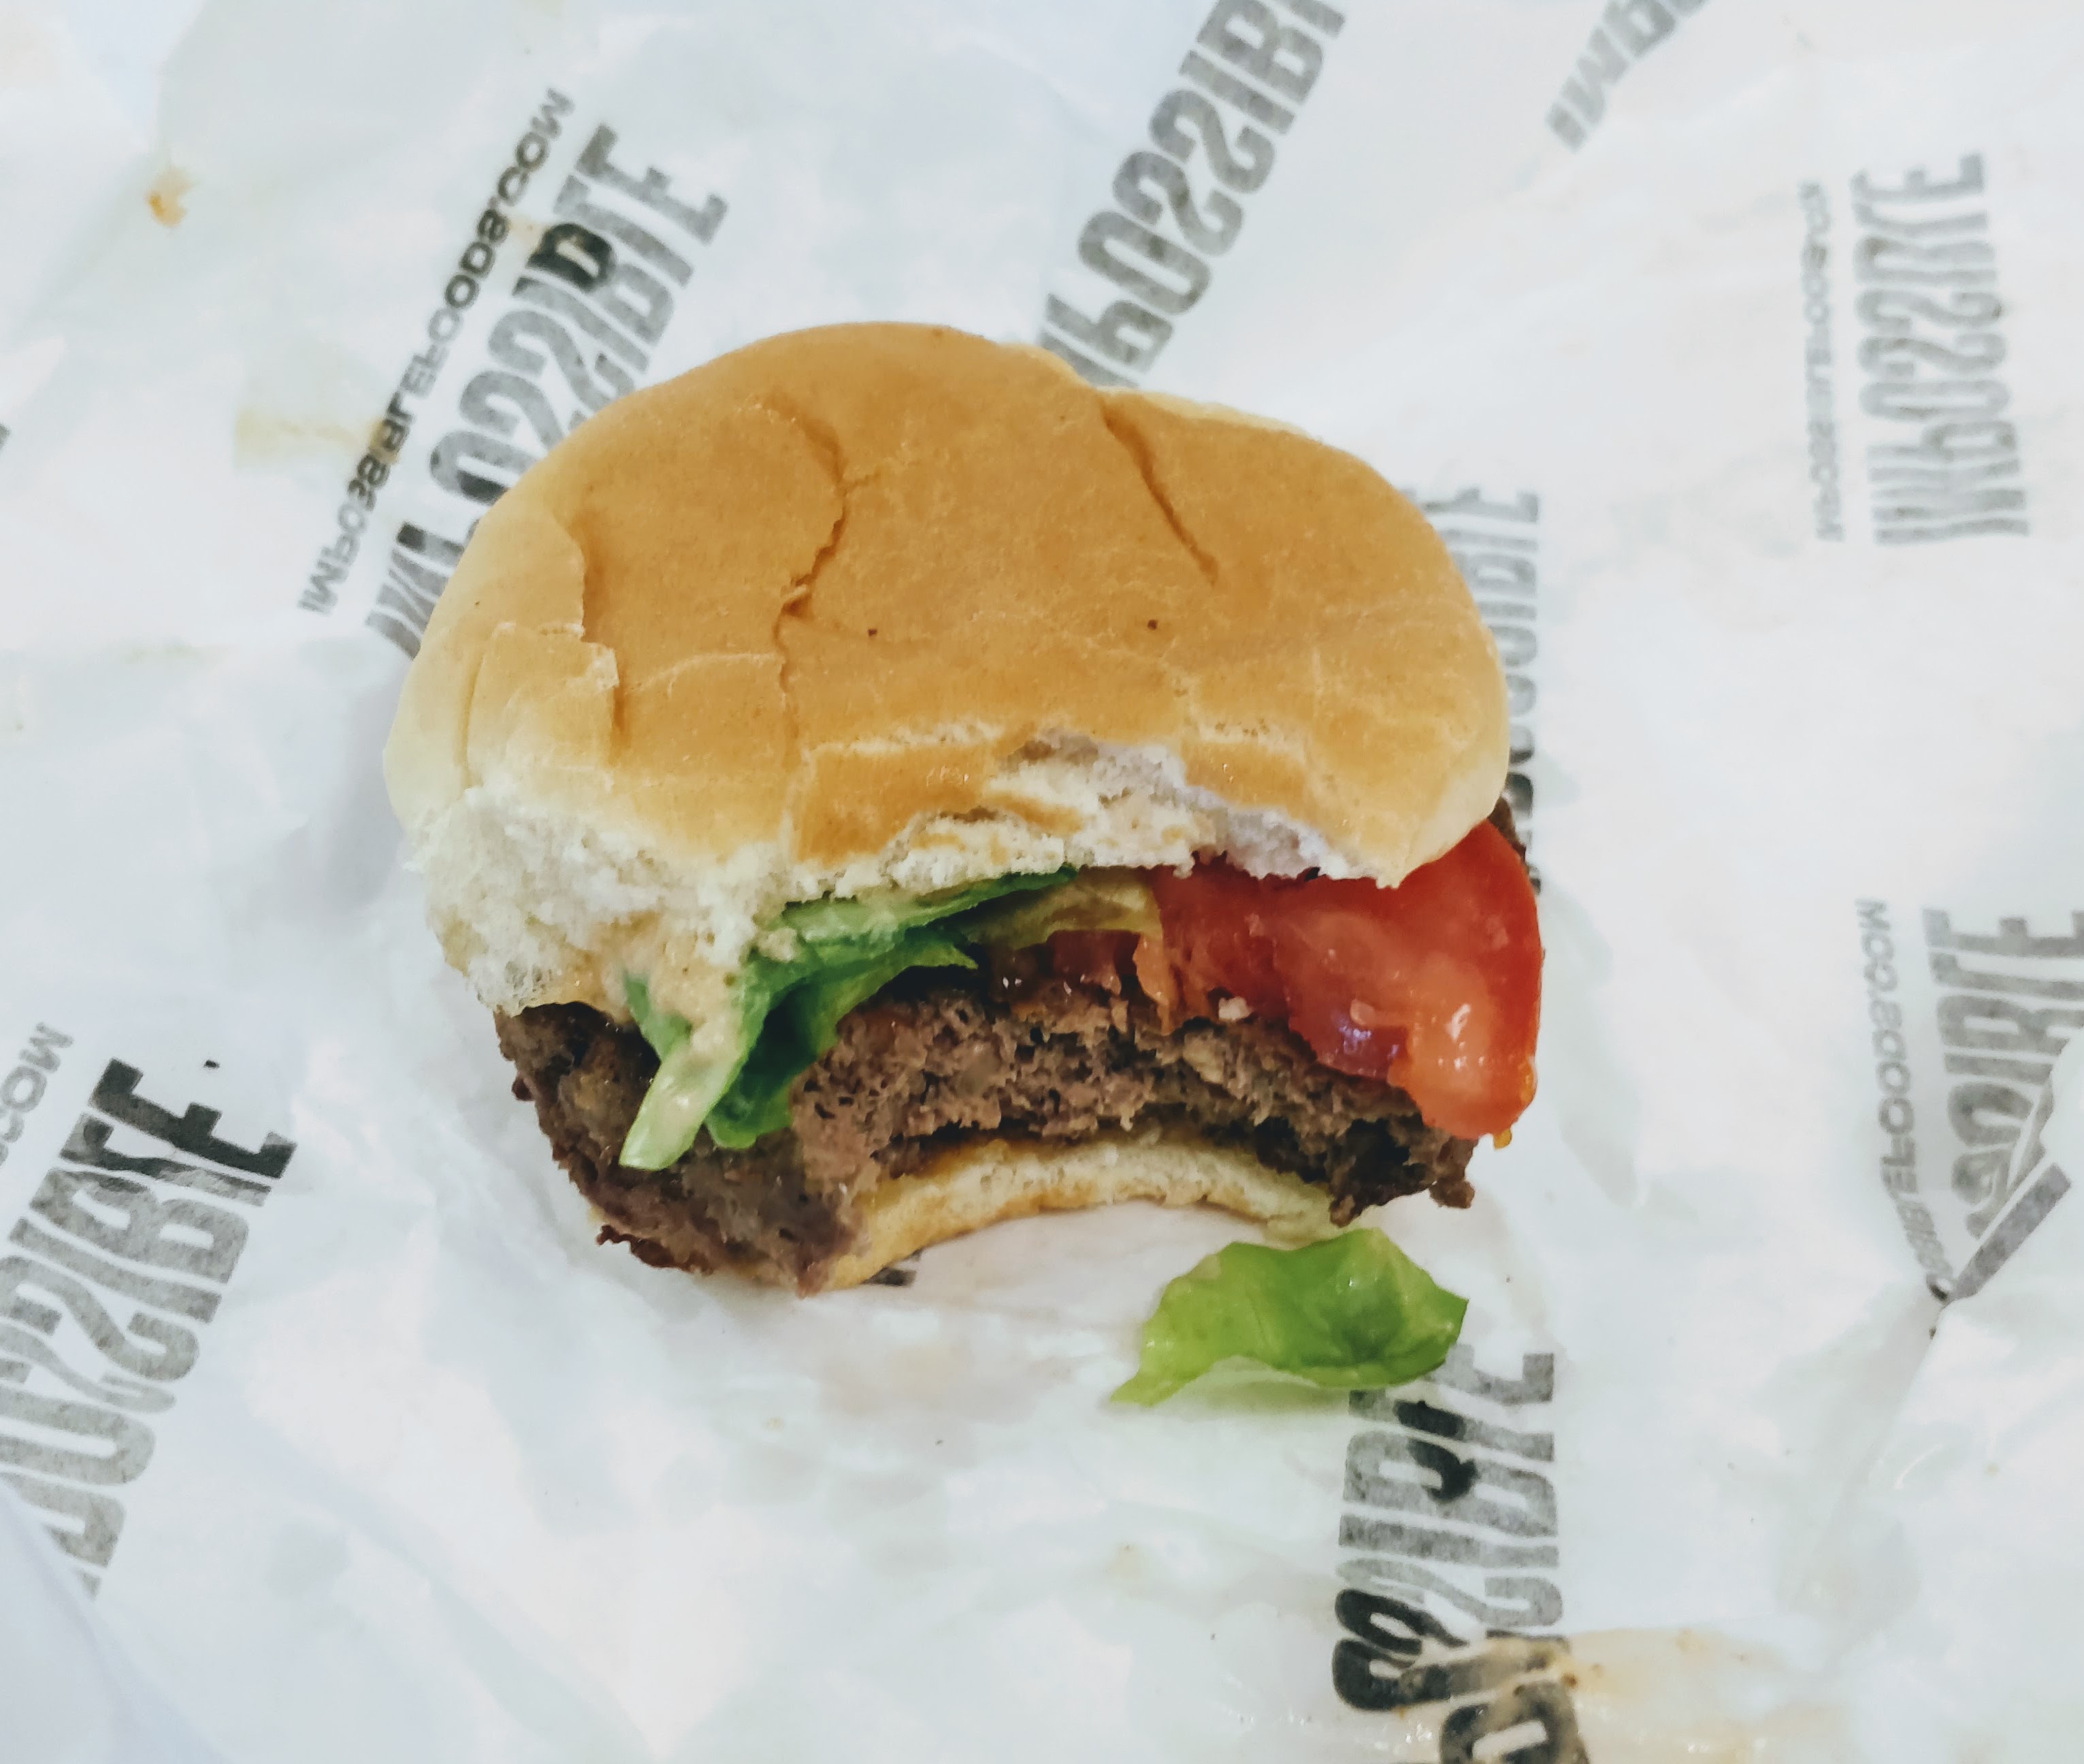 The vegetarian Impossible Burger